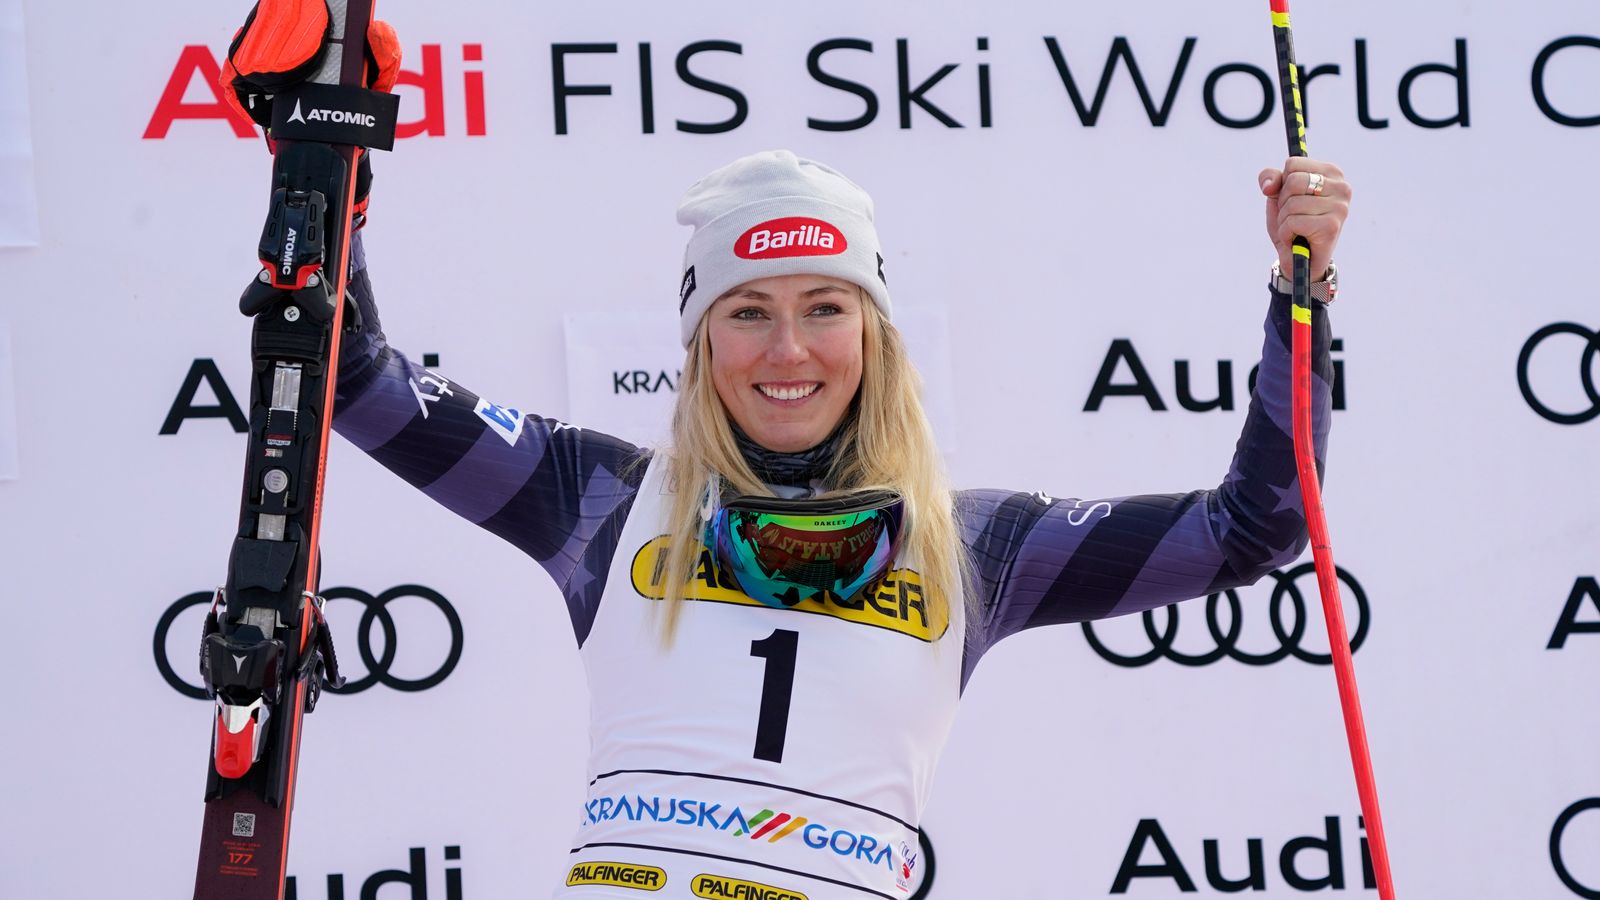 Mikaela Shiffrin equals American compatriot Lindsey Vonns womens World Cup record with 82nd win News Sky Sports